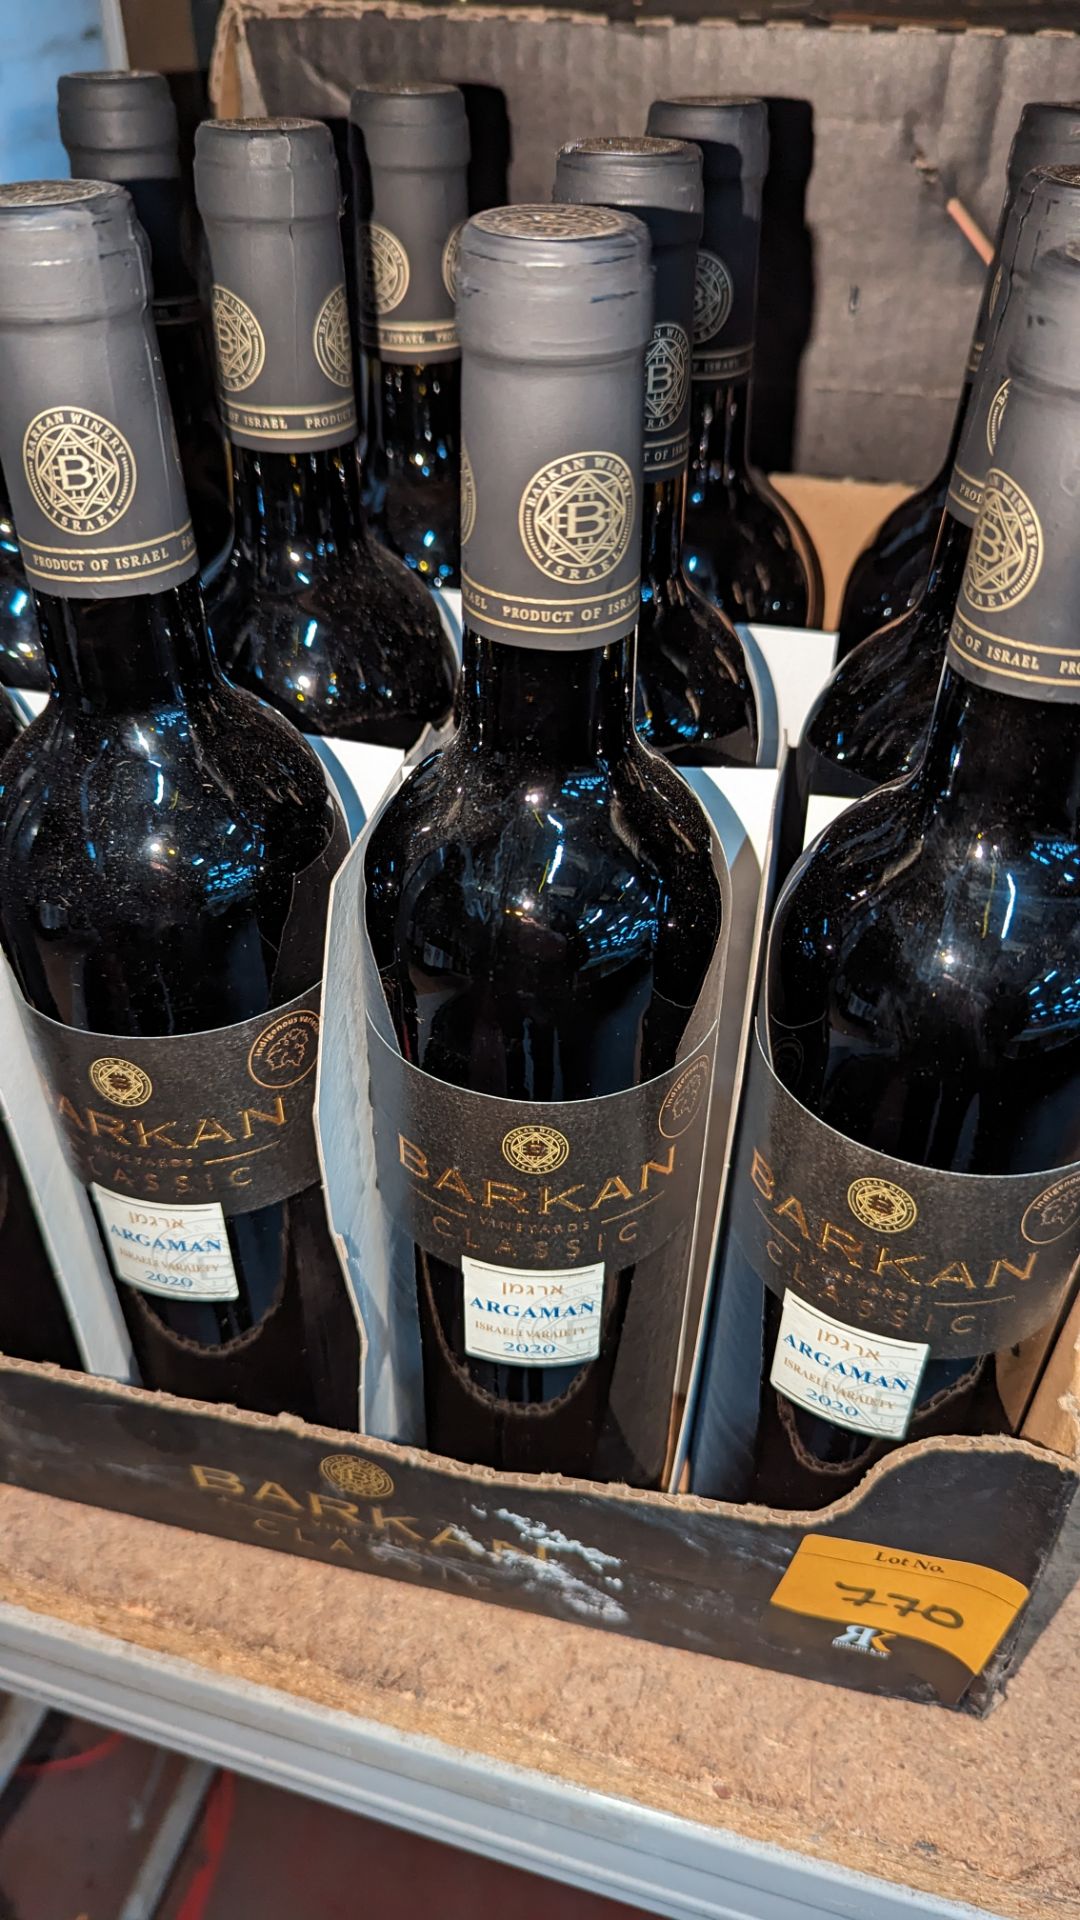 12 bottles of Barkan Vineyards Classic Argaman 2020 Israeli red wine sold under AWRS number XQAW0000 - Image 3 of 4